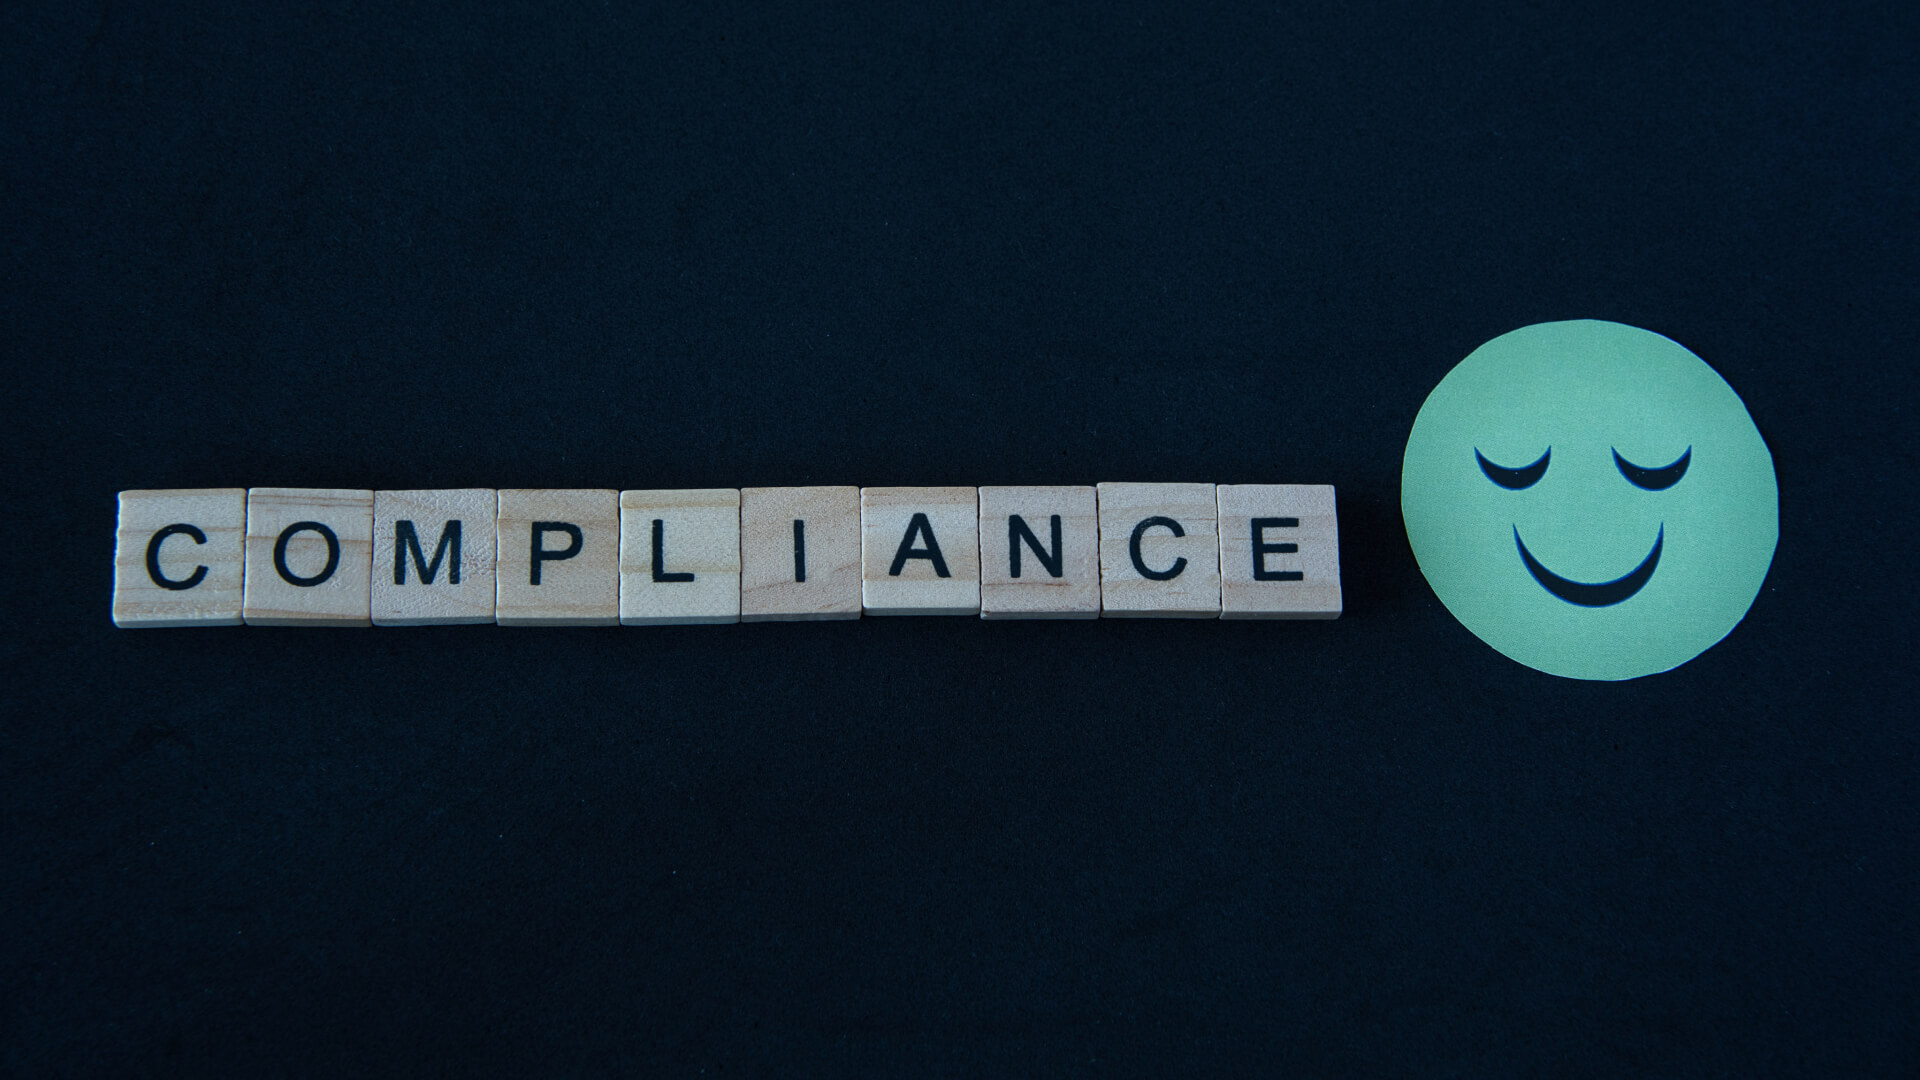 Scrabble letters on a dark background spelling out 'COMPLIANCE' next to a paper smiley face, symbolizing the positive aspects of adhering to rules and regulations.